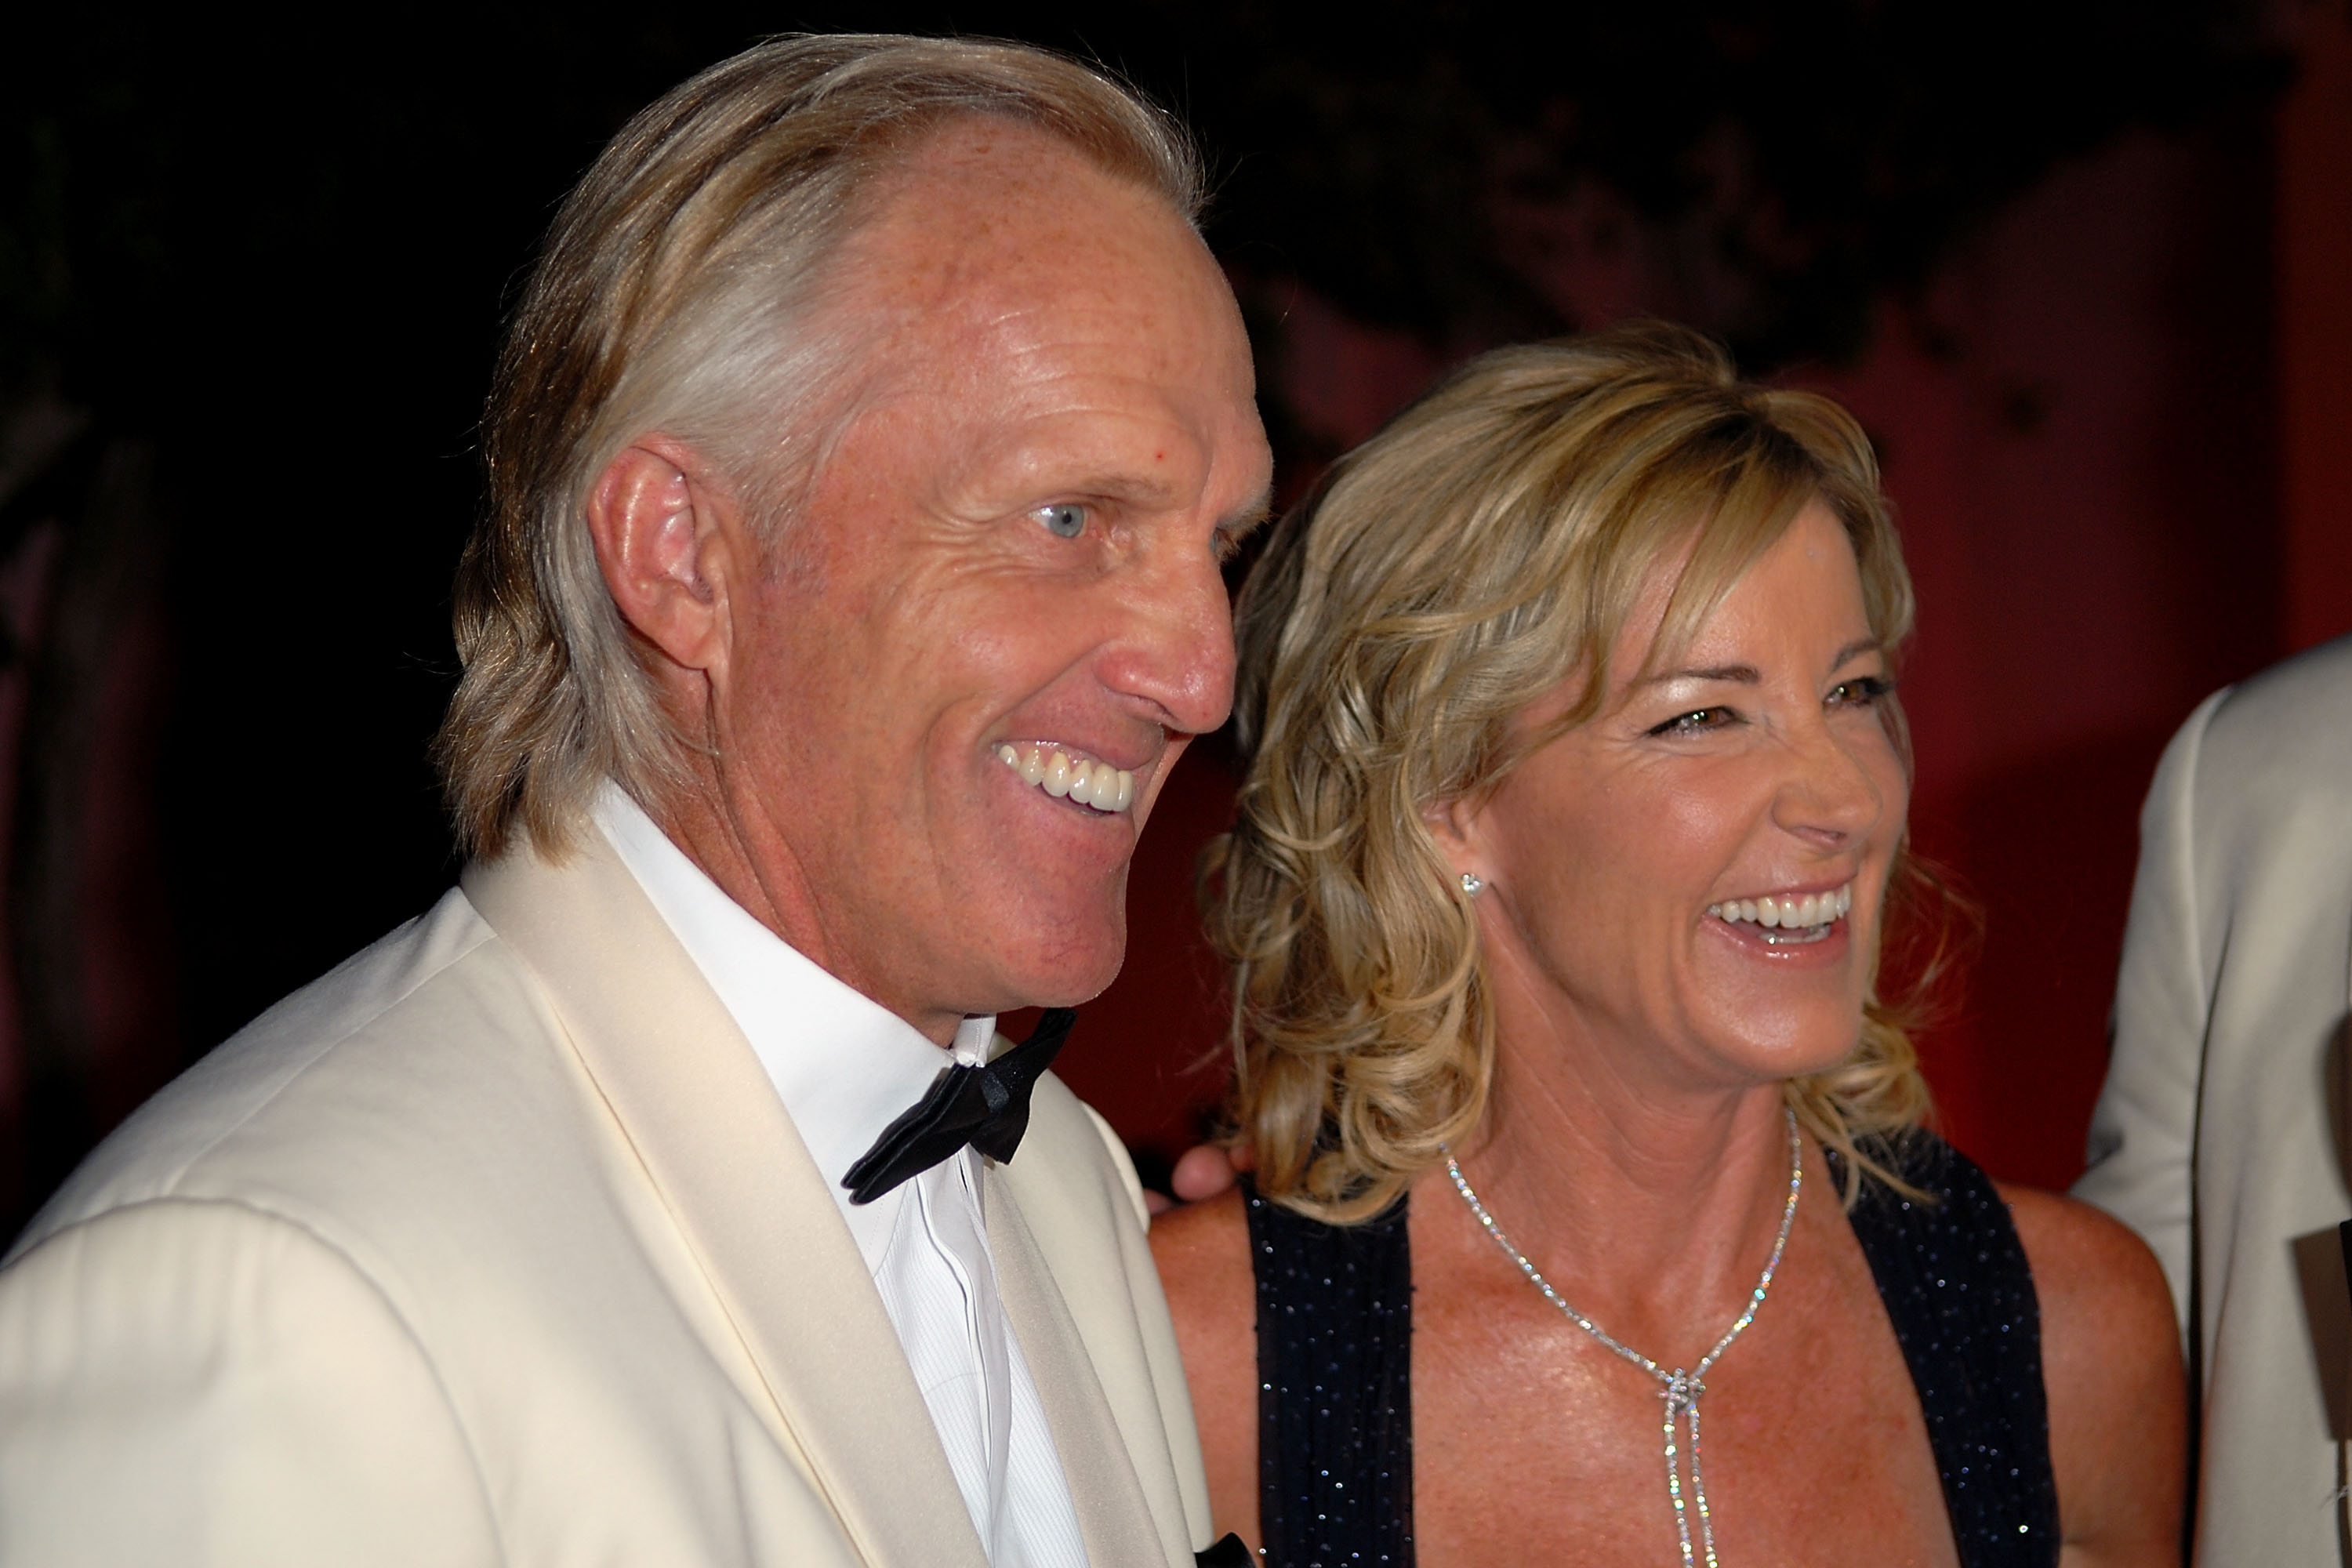 Greg Norman and Chris Evert on November 02, 2007, in Boca Raton, Florida. | Source: Getty Images